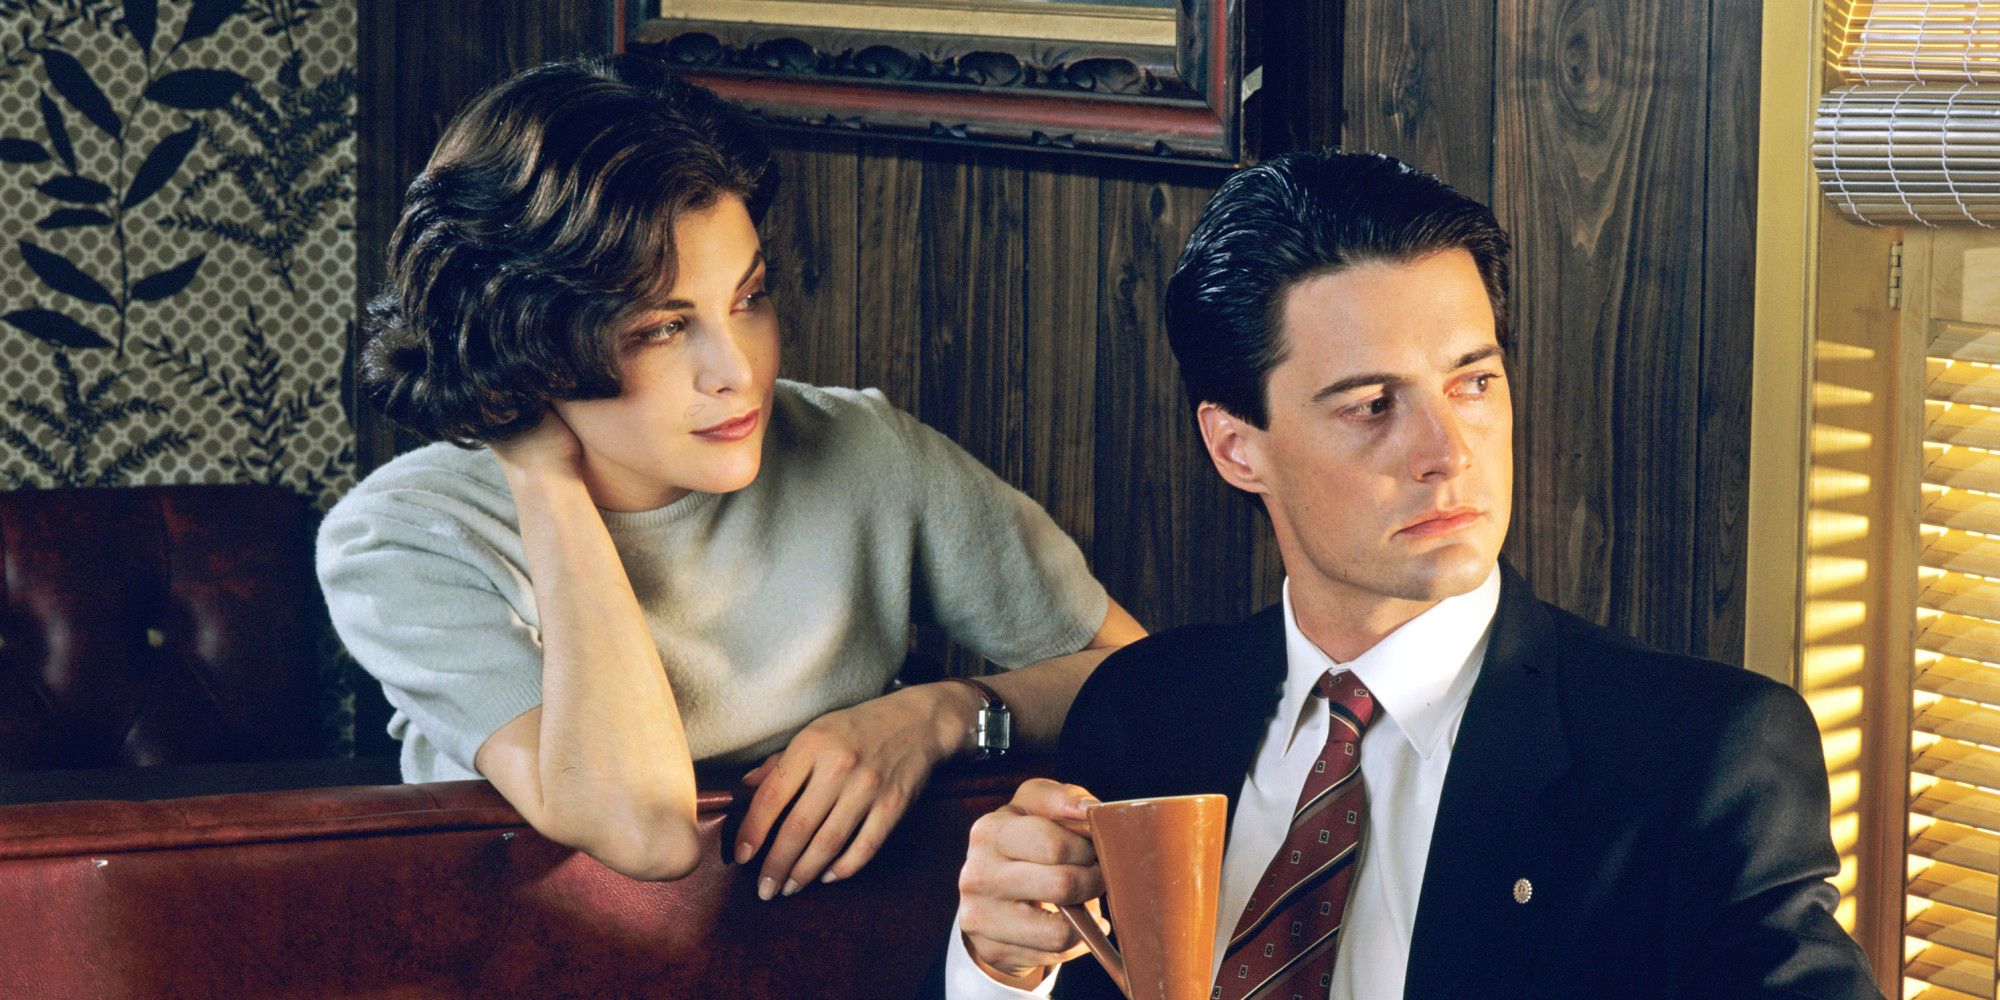 Sherilyn Fenn and Kyle MacLachlan as Audrey Horne and Agent Dale Cooper in Twin Peaks